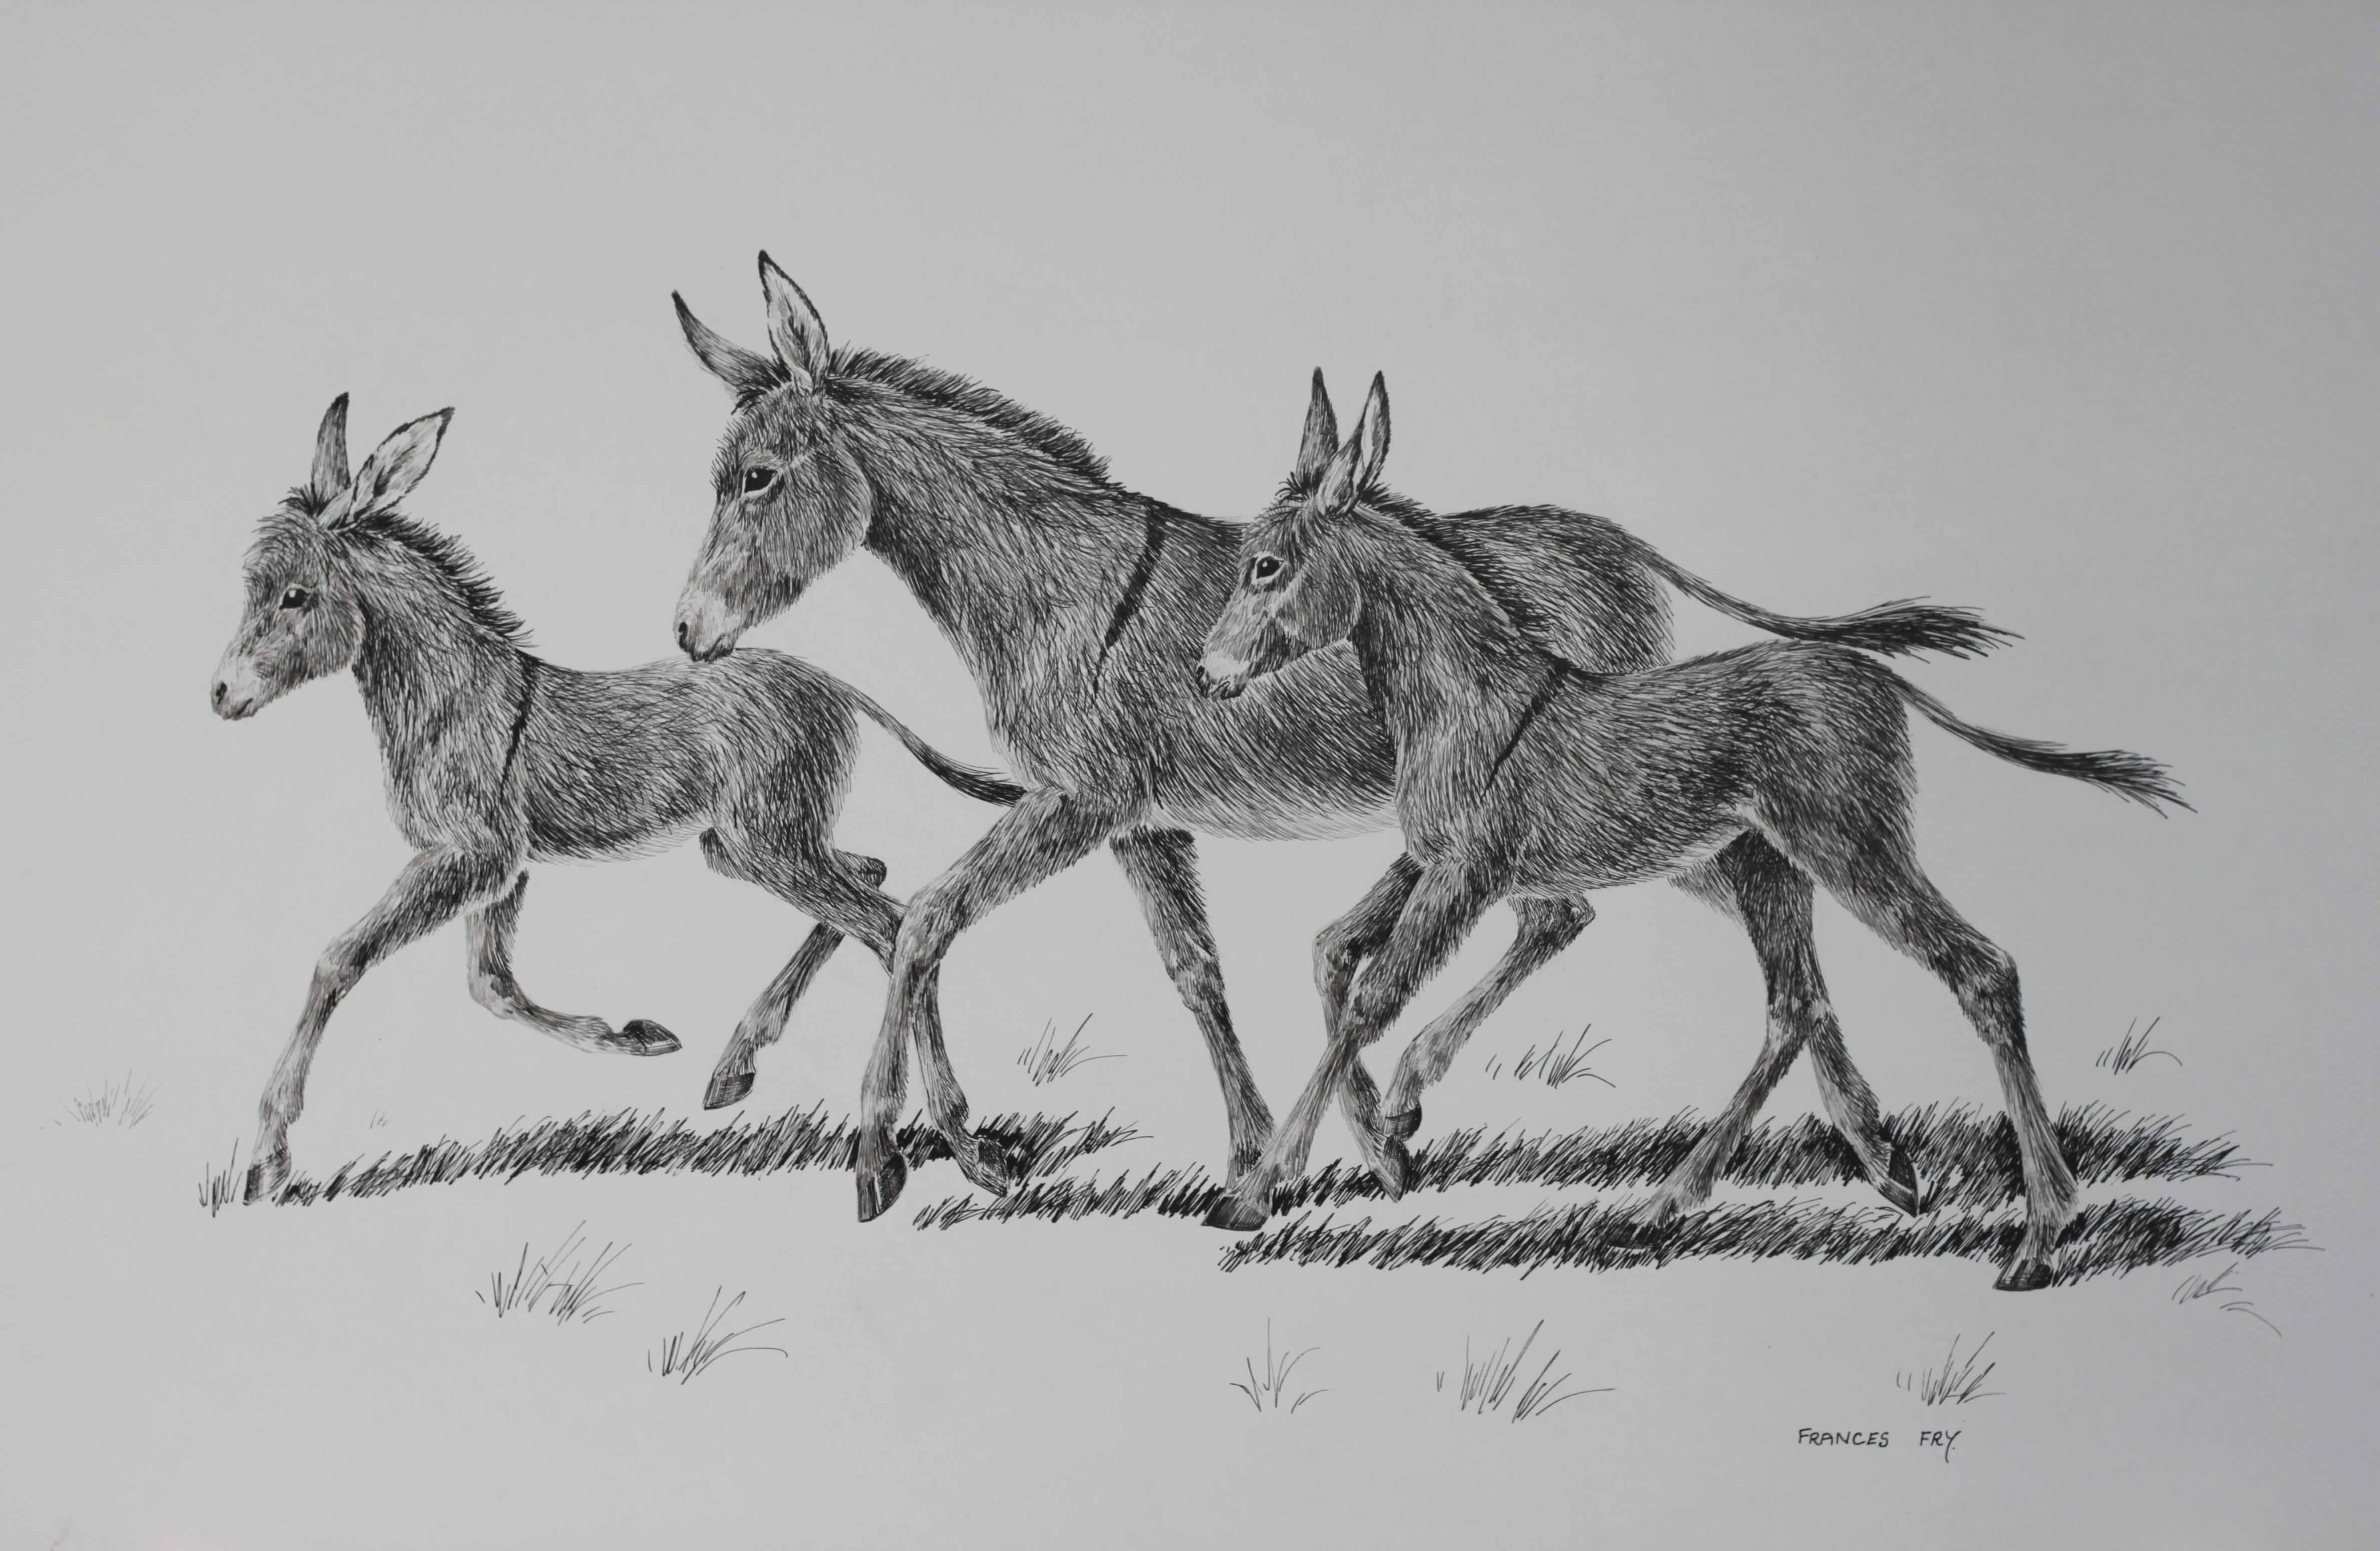 Click to see full size: Pen and Ink of a family of donkeys running, the mare with two fouls by the wildlife artist and illustrator Frances Fry- Pen and Ink of a family of donkeys running, the mare with two fouls by the wildlife artist and illustrator Frances Fry 

Signed in ink ?FRANCES FRY?

English, late 20th century

